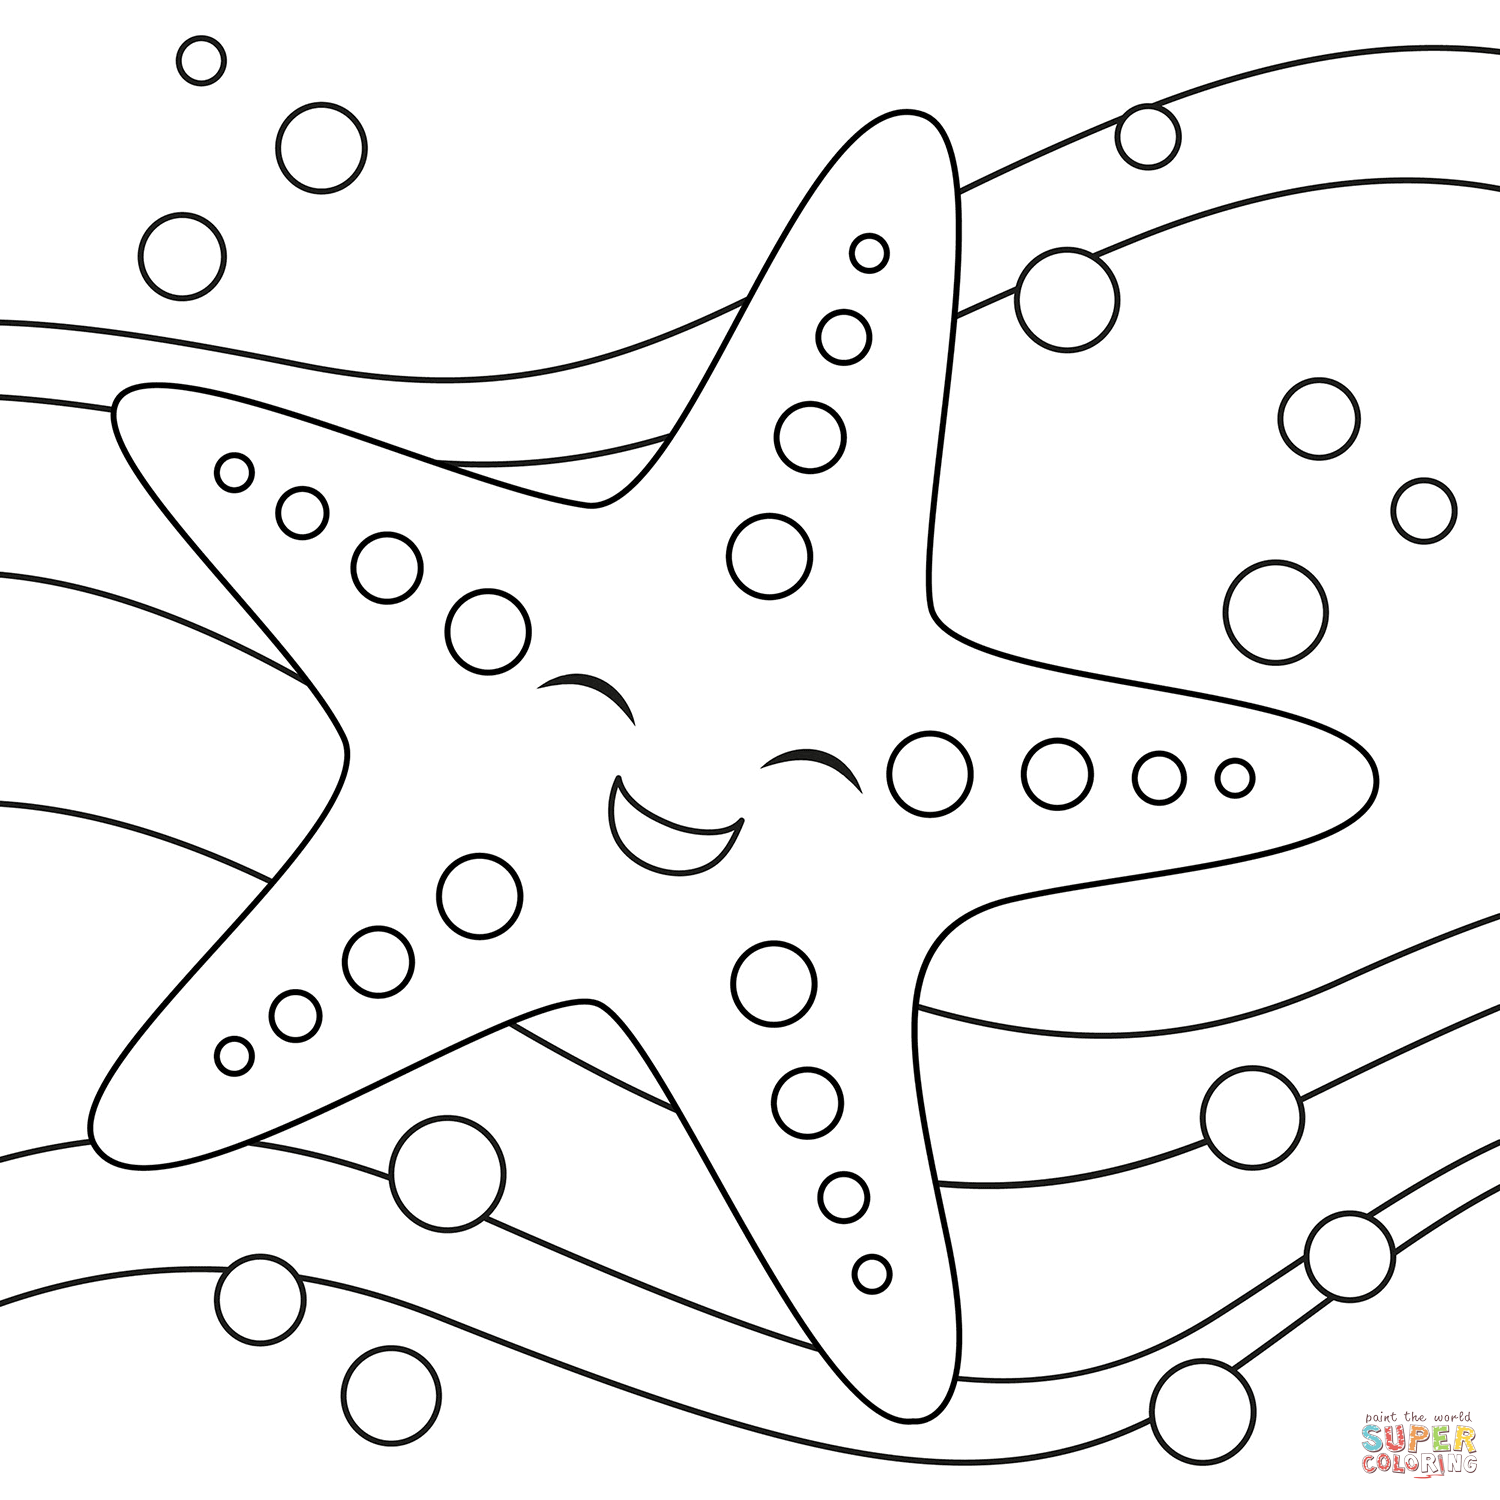 Cute Starfish coloring page | Free Printable Coloring Pages